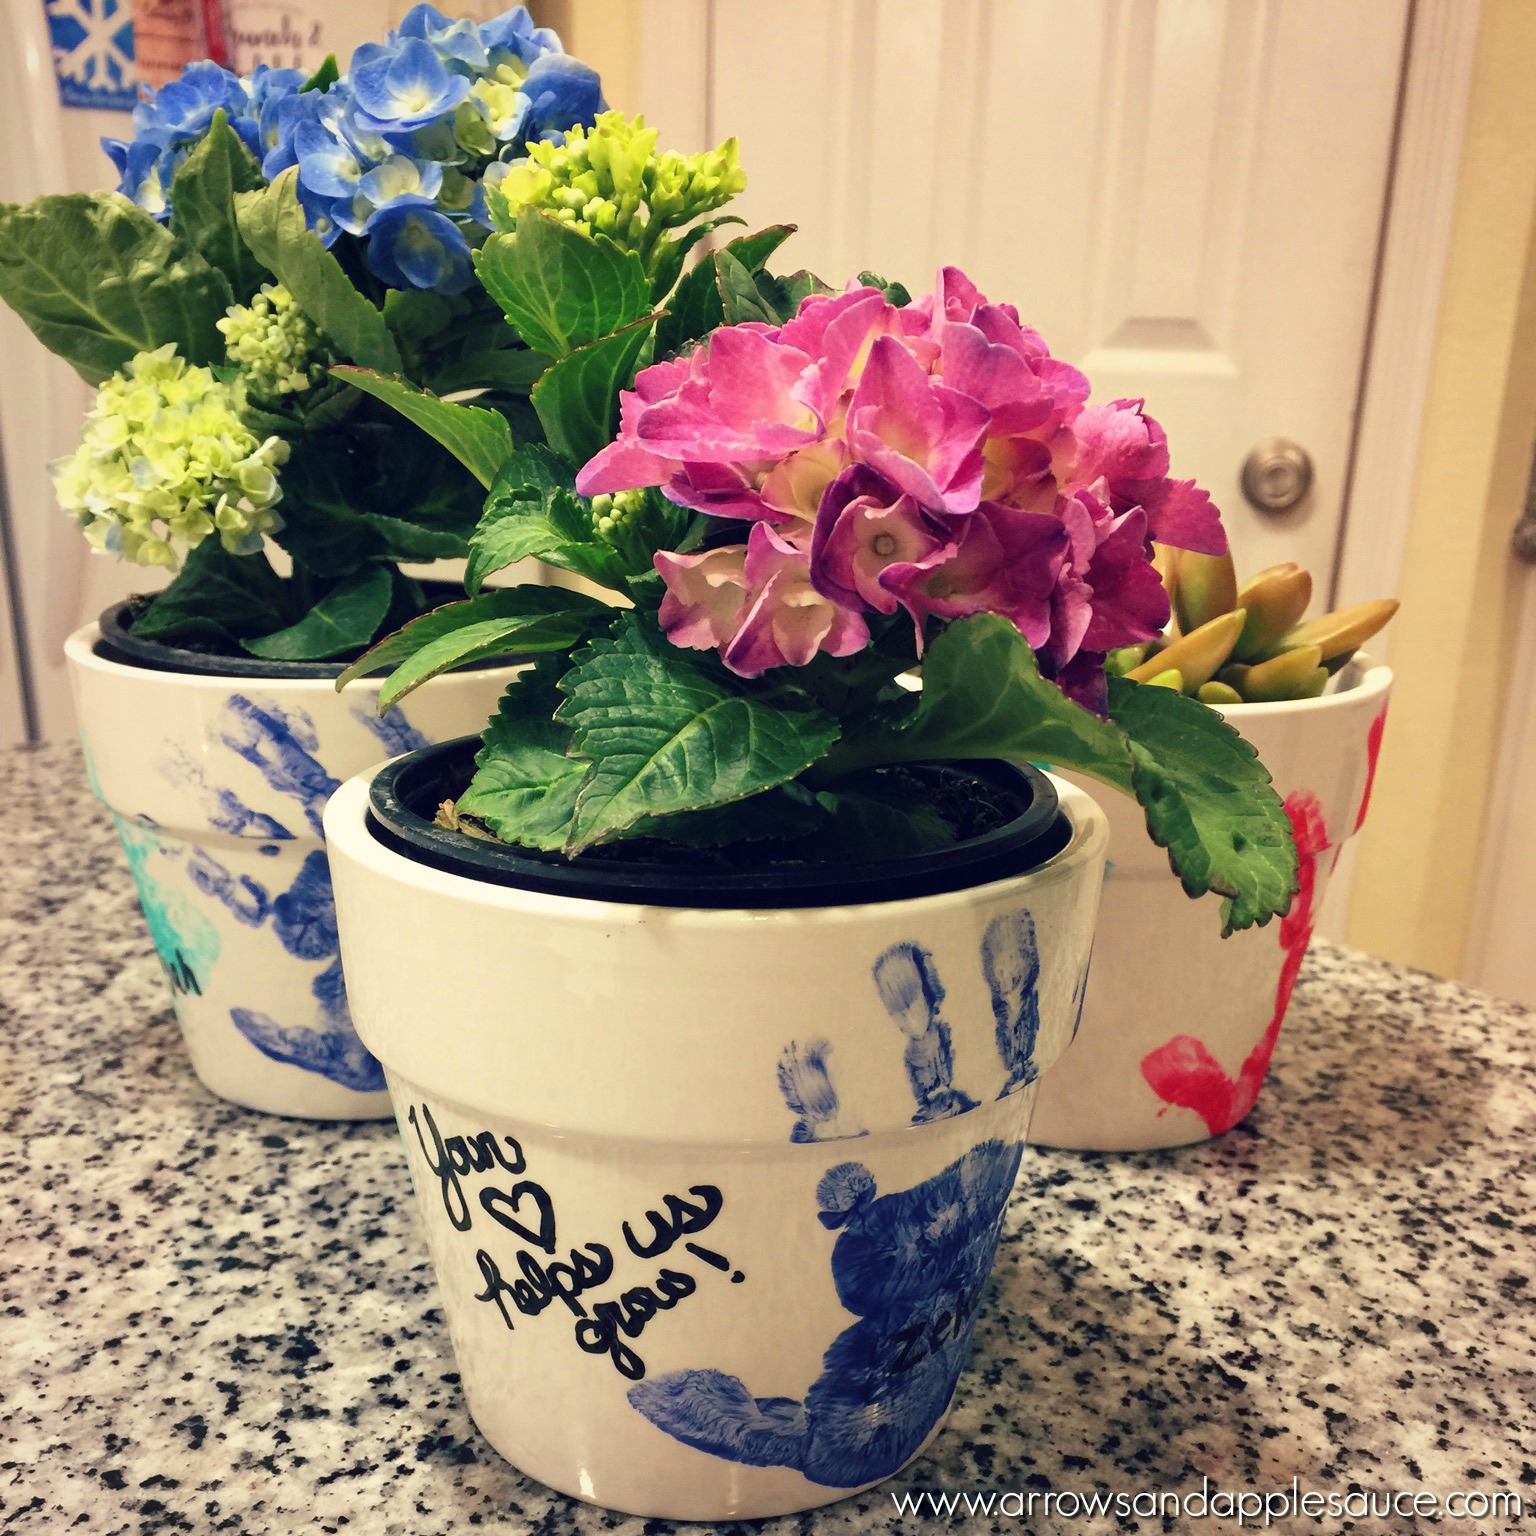 These fun hand print flower pots are easy to make with your kids, and make the perfect Mother's Day gifts. They are sure to become beloved keepsakes. #mothersday #handprint #kidscrafts #keepsakes #flowerpot #homemadegift #handprintcrafts #DIY #madewithlove #momlife #crafttime